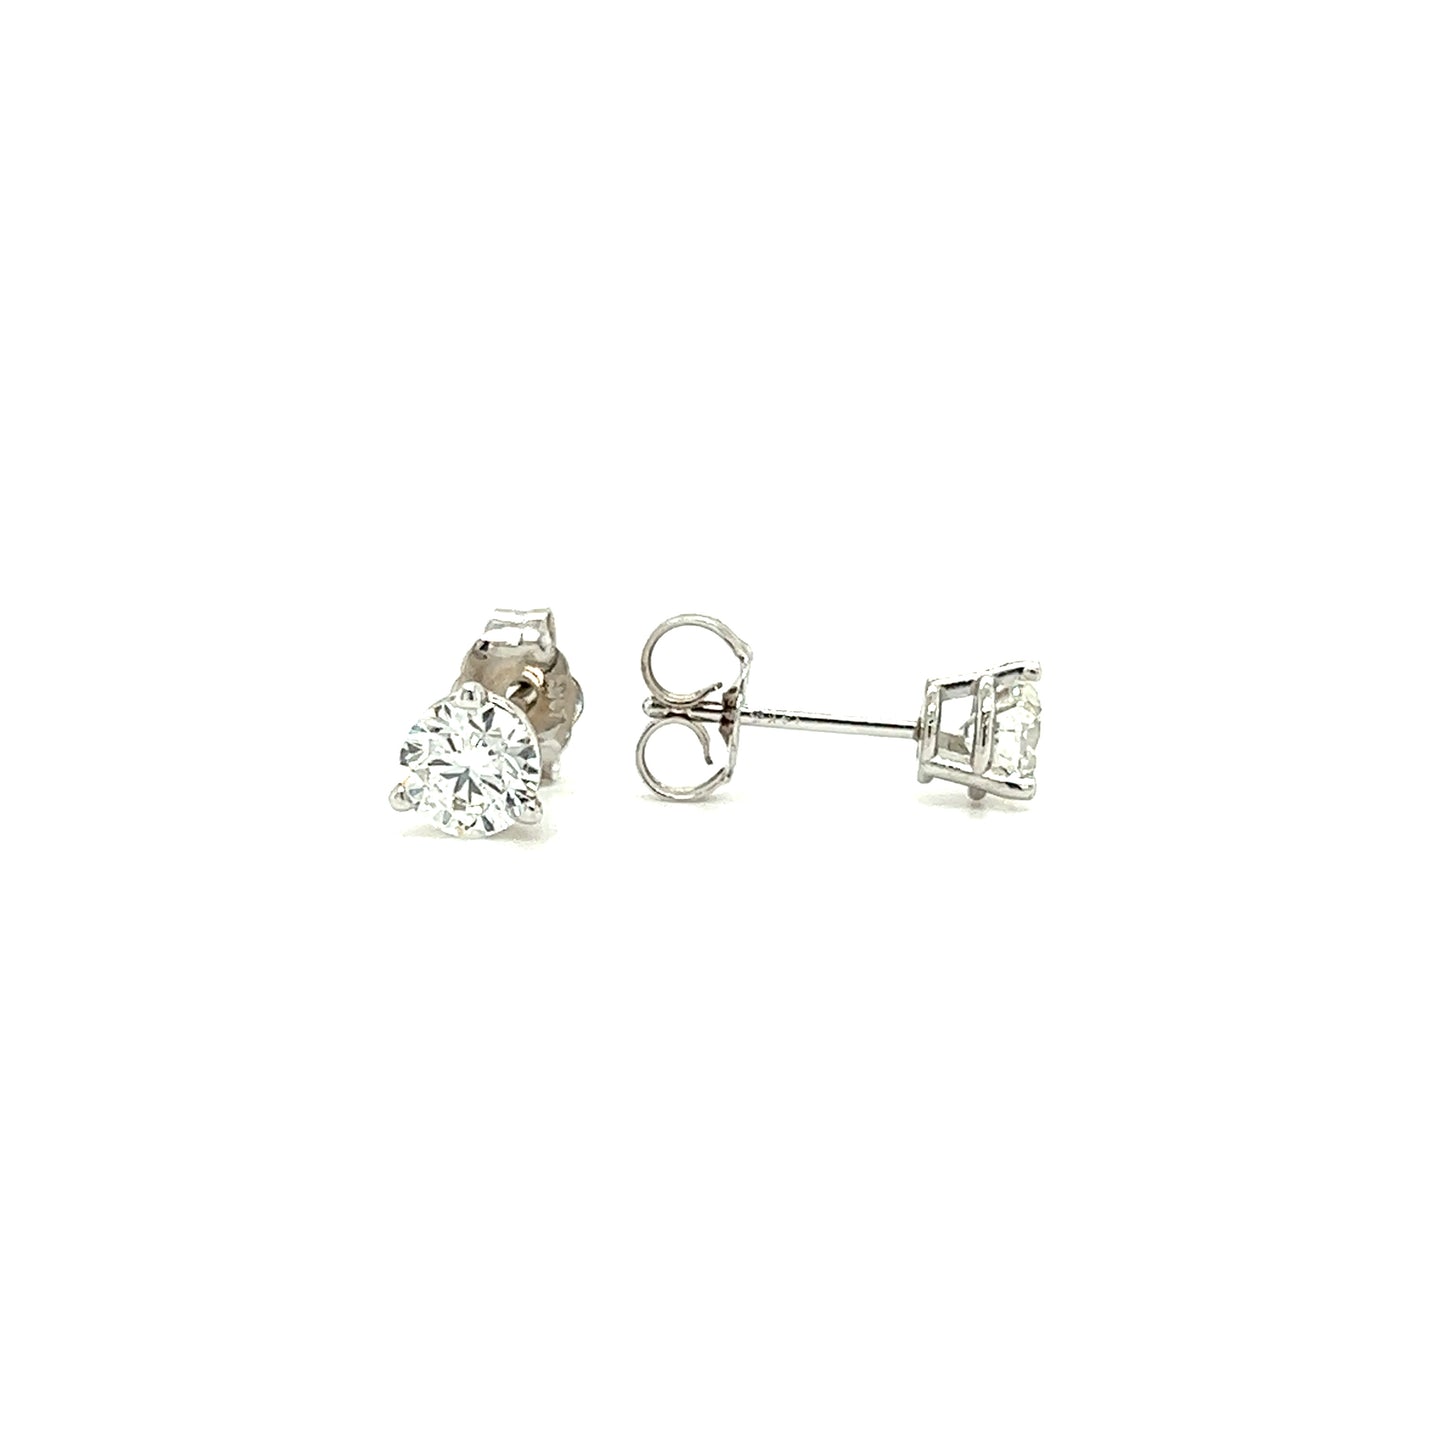 Diamond Stud Earrings with 0.72ctw of Diamonds in 14K White Gold Front and Side View